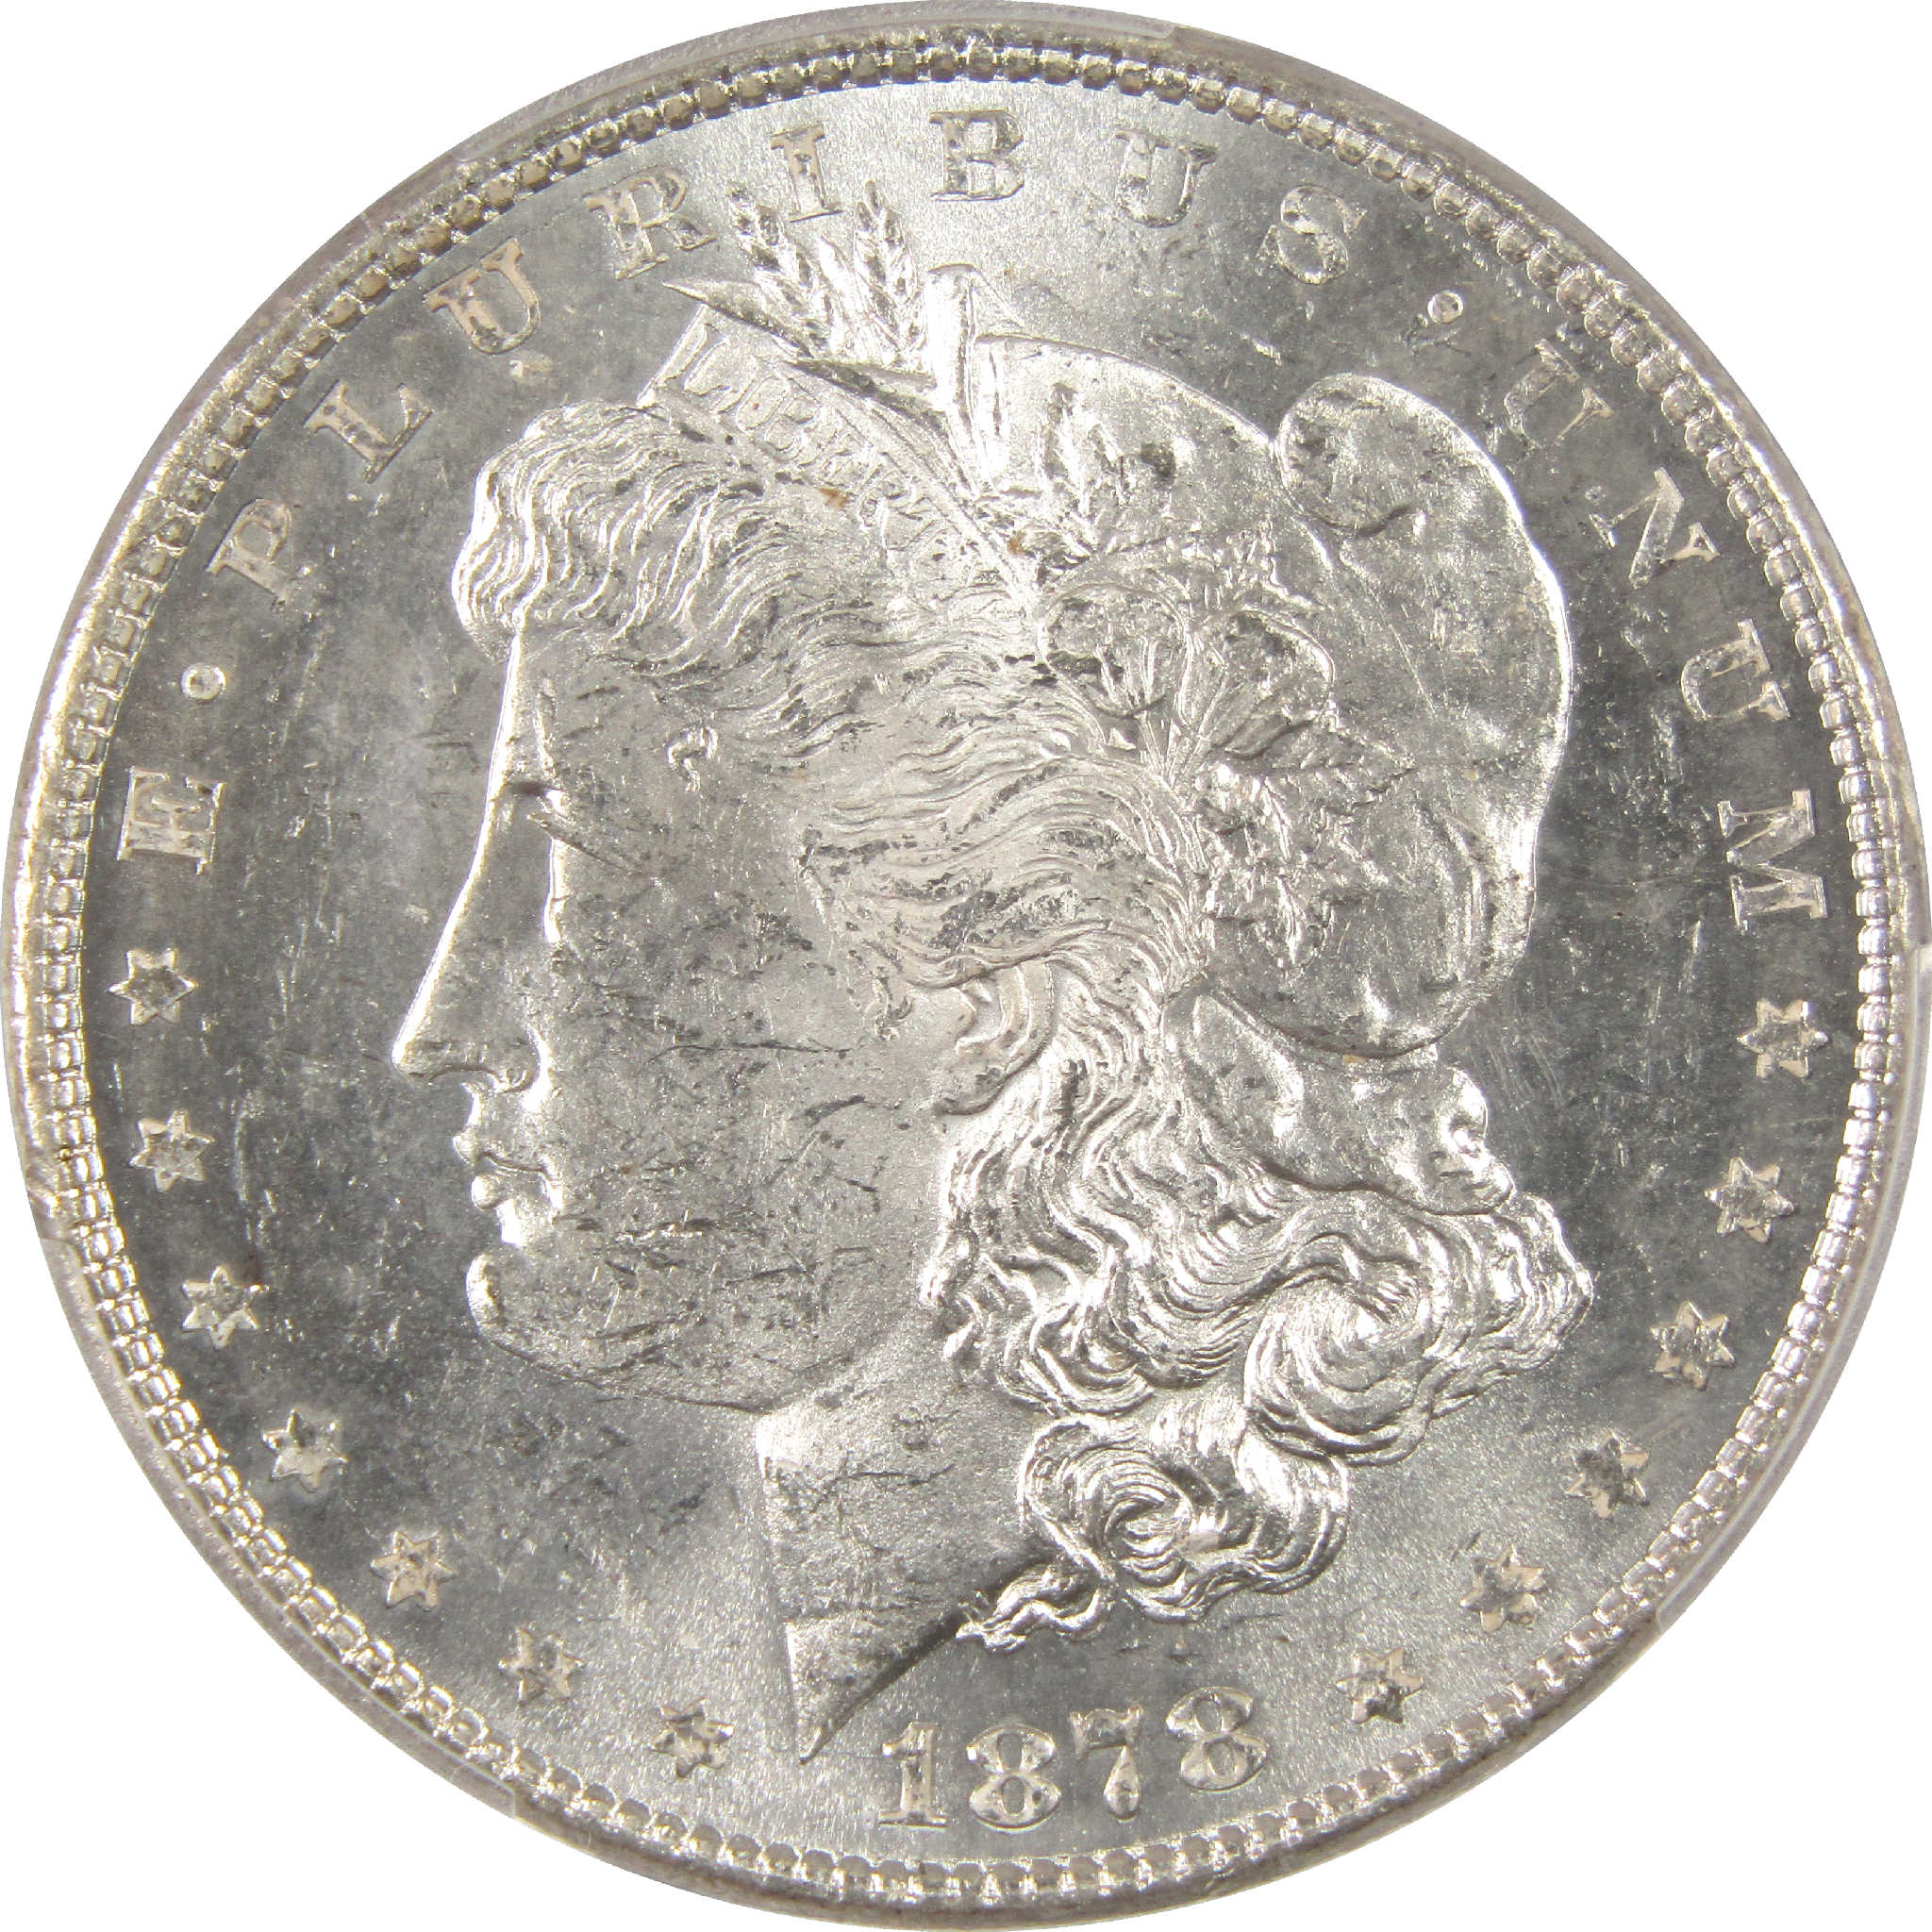 1878 8TF Morgan Dollar MS 62 PCGS Silver $1 Uncirculated SKU:I11339 - Morgan coin - Morgan silver dollar - Morgan silver dollar for sale - Profile Coins &amp; Collectibles